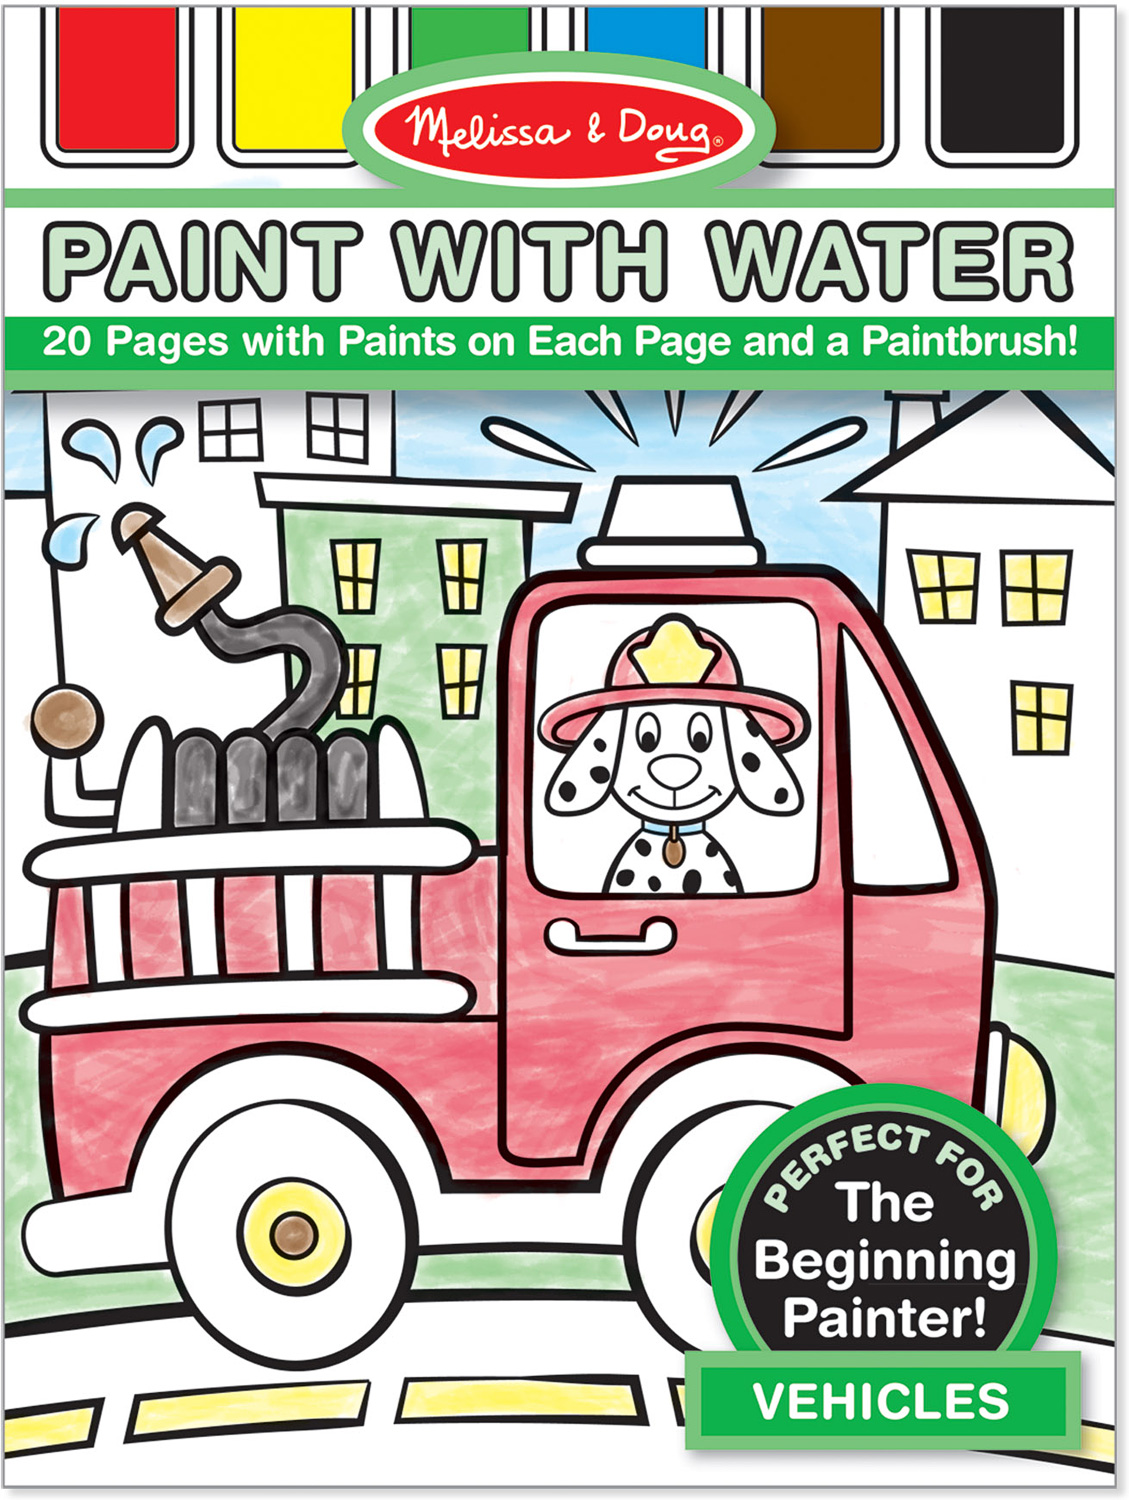 Paint With Water, Vehicles - Melissa & Doug